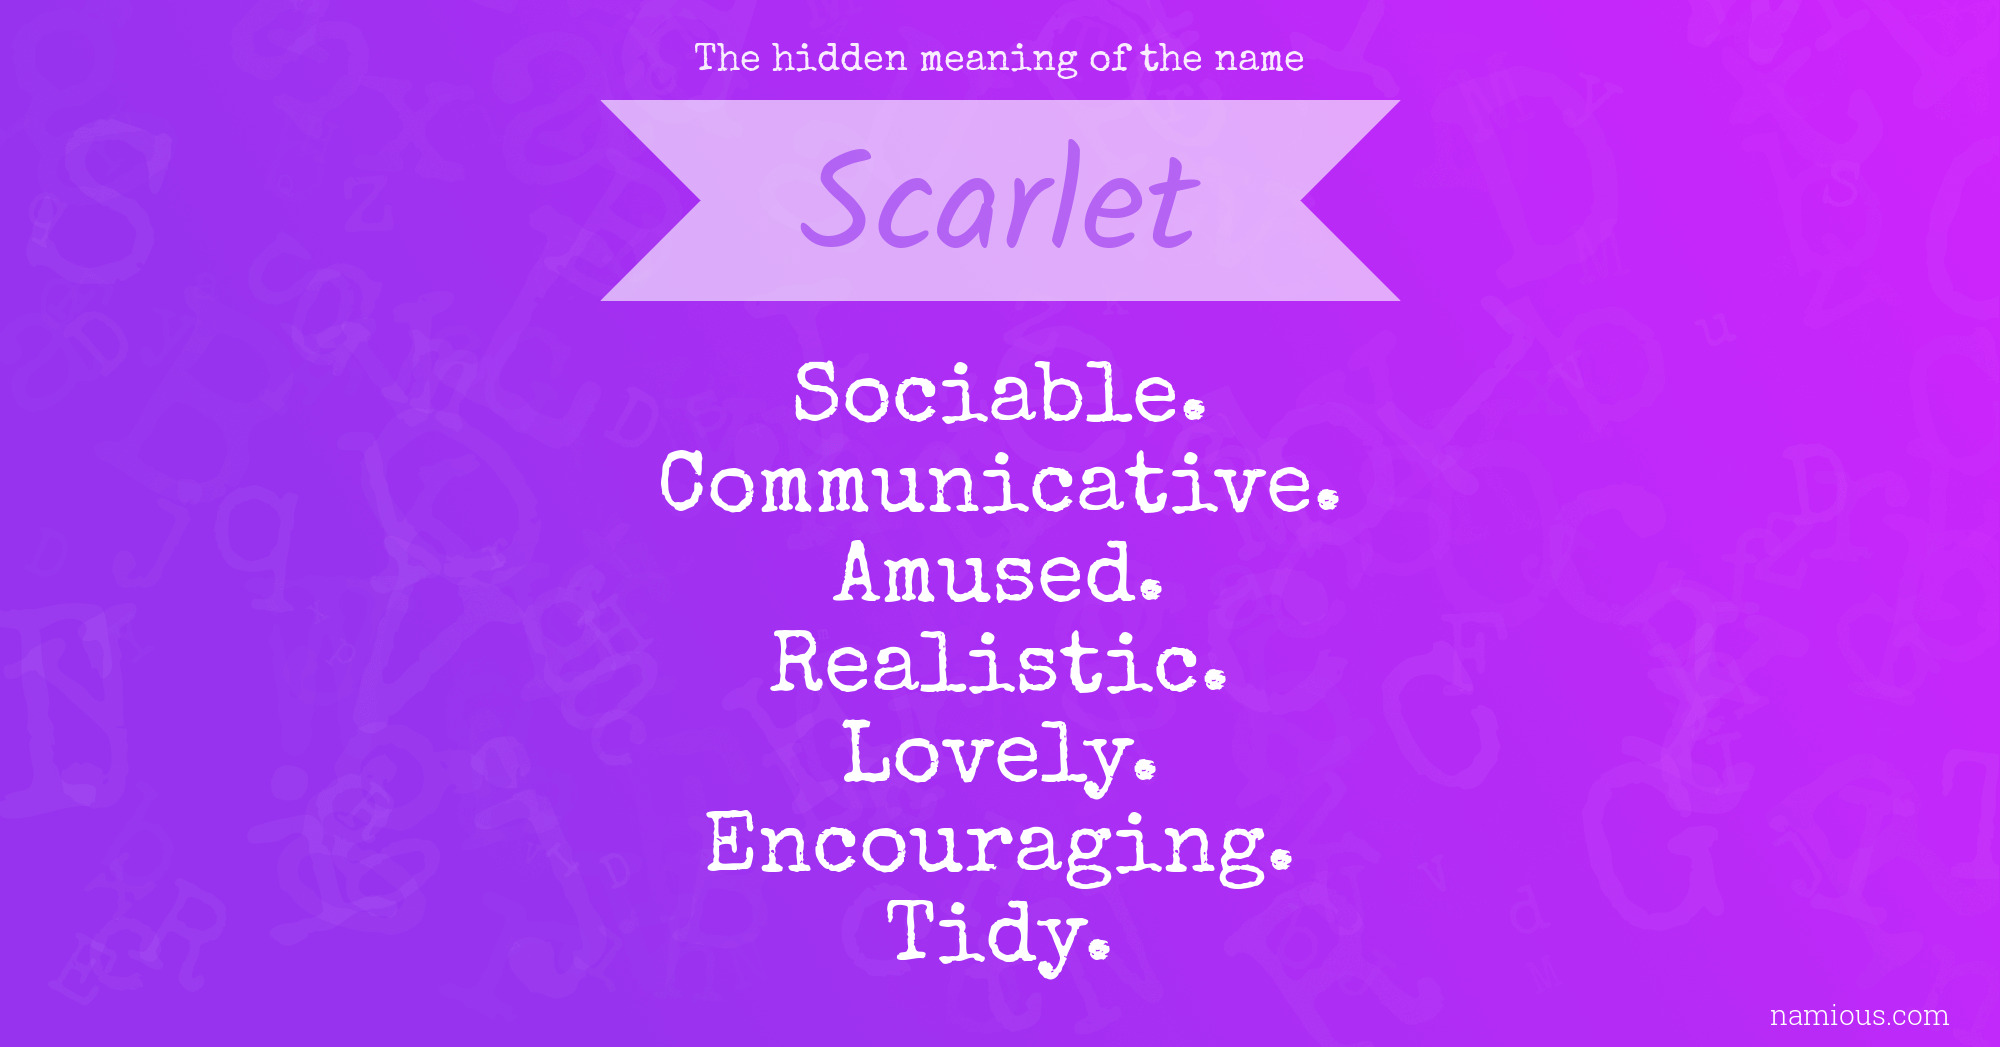 The hidden meaning of the name Scarlet